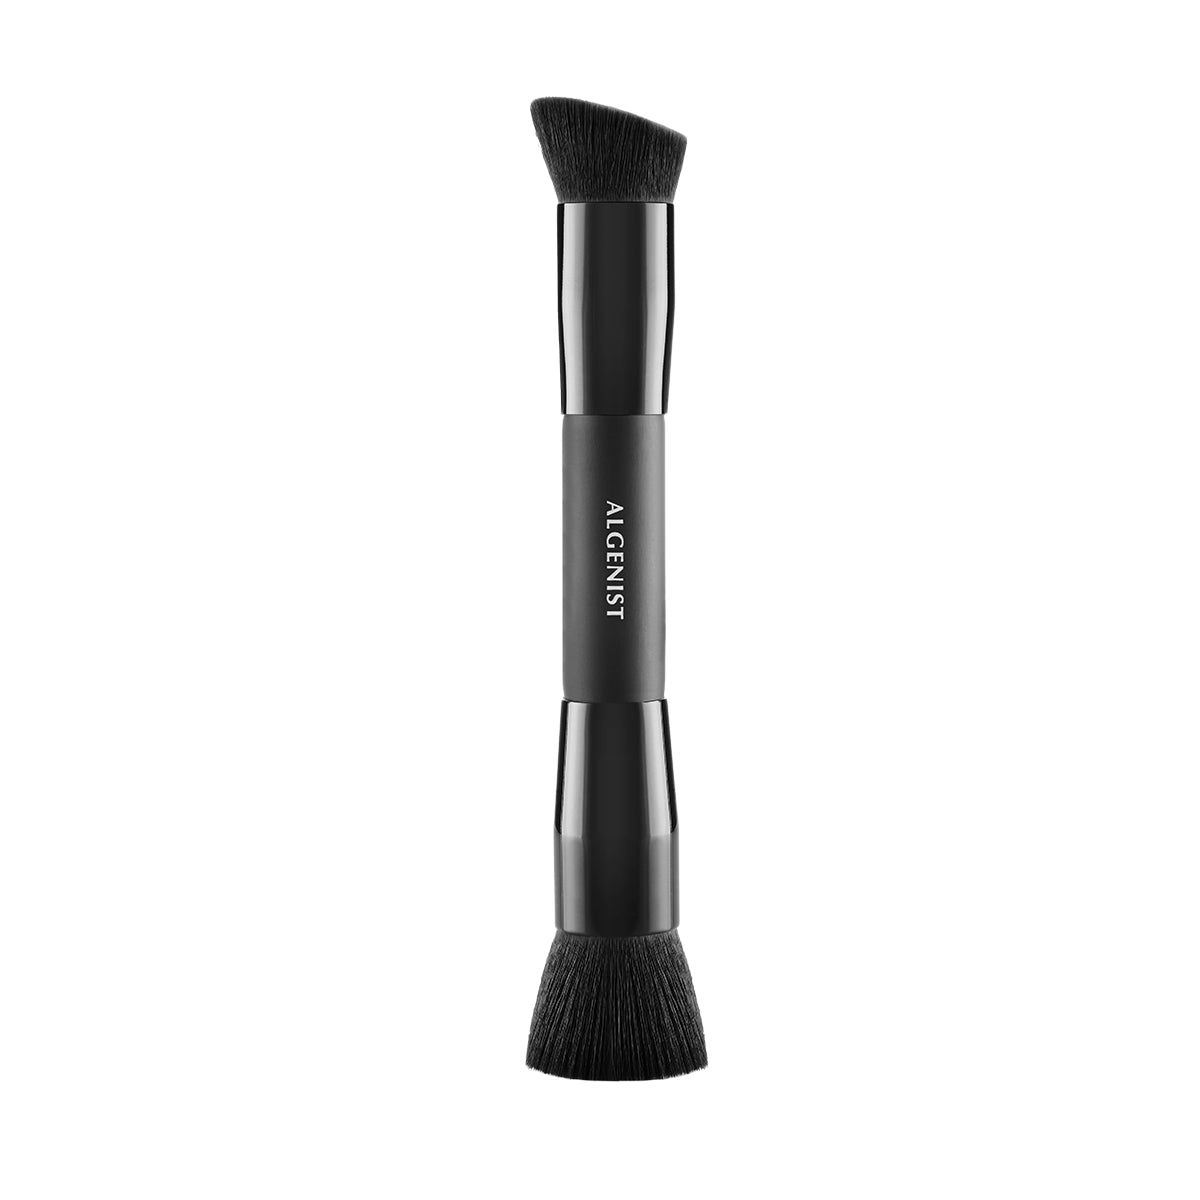 Algenist - Reveal Dual-Ended Buffing Brush